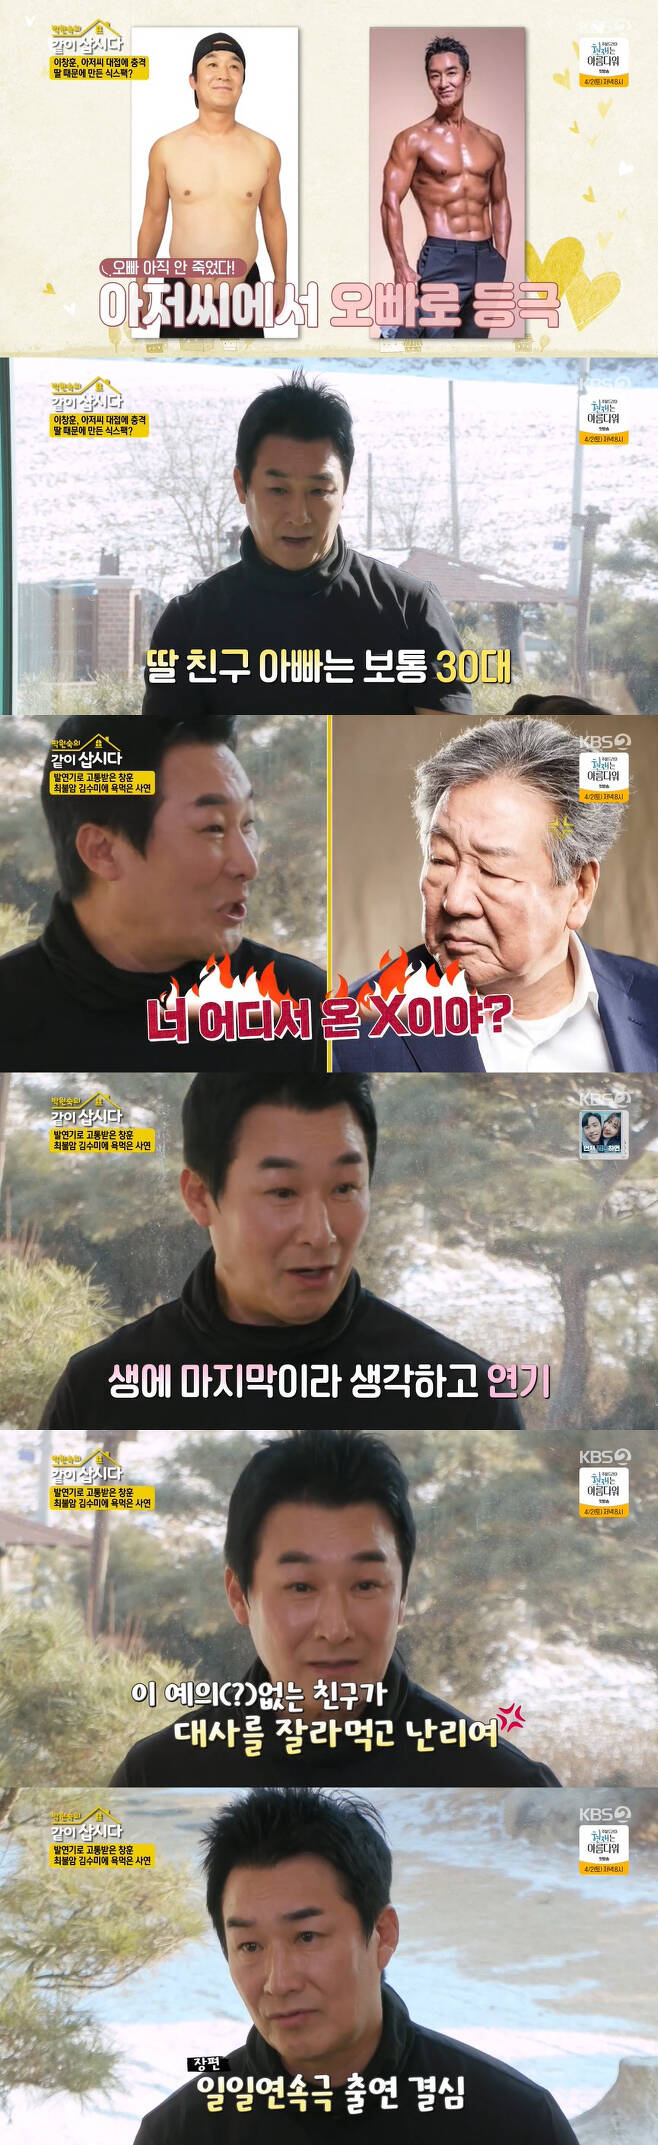 Actor Lee Chang-hoon released an episode at the time of filming Moms Sea.On the 23rd KBS 2TV Lets Live With Park Won-sook Season 3, the story of Lee Chang-hoon, who visited the oblique after last week, was revealed.Lee Chang-hoon said he gained up to 94kg after marriage, but managed to lose 16kg in 16 weeks.I was born in the world and did my best, he said.Lee Chang-hoon, who says that the reason for the steady exercise after the diet success is because of her daughter, said, My daughter has become one of this year.My daughters friends, Fathers, are all in their 30s, and I am in my 50s.  What if my daughter is teased as your father grandfather? I was worried about it. On the day, Lee Chang-hoon also released an episode related to the ambassadors mistake: I still remember my first ambassador when I made my debut, he said, I practiced while starving rice.But the first time I appeared, I was so nervous that I finally got NG. I practiced for three hours and I thought I should quit the actor. Lee Chang-hoon, who later made a similar mistake when he appeared in The Power Diary, said, I acted with Choi Bum-am.I kept NG, and Choi said, Where are you from? I had 12 NGs and sat down.I will quit the actor, and I think it is the last, so it was so good. However, he made a mistake of cutting off the ambassador of Choi Bum-am at the moment of his heartfelt moment. He said, Kim Soo-mi, who watched from the side, said, I cut the ambassador without courtesy. So I did it three times. From then on, I hated Kim Soo-mi, Choi Bul-am. Lee Chang-hoon said, The first script reading by actors and staff was the most scary. When I become a star, I make a lot of mini-series.Before the trembling, the drama was over, so all I did was shake. When I read a lot of drama, I was trembling again. So I took the first daily drama, The River of Mojeong. It was only a year and two months, and I felt that this was acting. Lee Chang-hoon released a behind-the-scenes story at the time of filming the popular drama Moms Sea.I was actually going to star only until the sixth episode, when Jang Dong-gun was going well, he said, who became popular with Ko So-young and a new generation couple in the drama.But by the time I was six times older, I was more popular than Jang Dong-gun, with the top ranking being Ko So-young and Lee Chang-hoon.So I was the first Ko So-young man to marriage me, he said, boasting the popularity that was high enough to change the contents of the drama.Lee Chang-hoon also said, I was fighting so when I was acting, Confessions that I was not good with Ko So-young at the time of shooting.But when Ko So-young fights, he always says, When is Jang Dong-gun coming out?From then on, I looked for Jang Dong-gun and eventually marriage. Lee Chang-hoon, who had been the most popular in about five years after his debut, said, Kim Chan-woo was popular then.Kim Chan-woo was the number one hit player for two and a half years, so I wanted to be more popular, too, with huge commercials and lots of money.But after a year and a half, I got a ticket. So I wanted to be over.